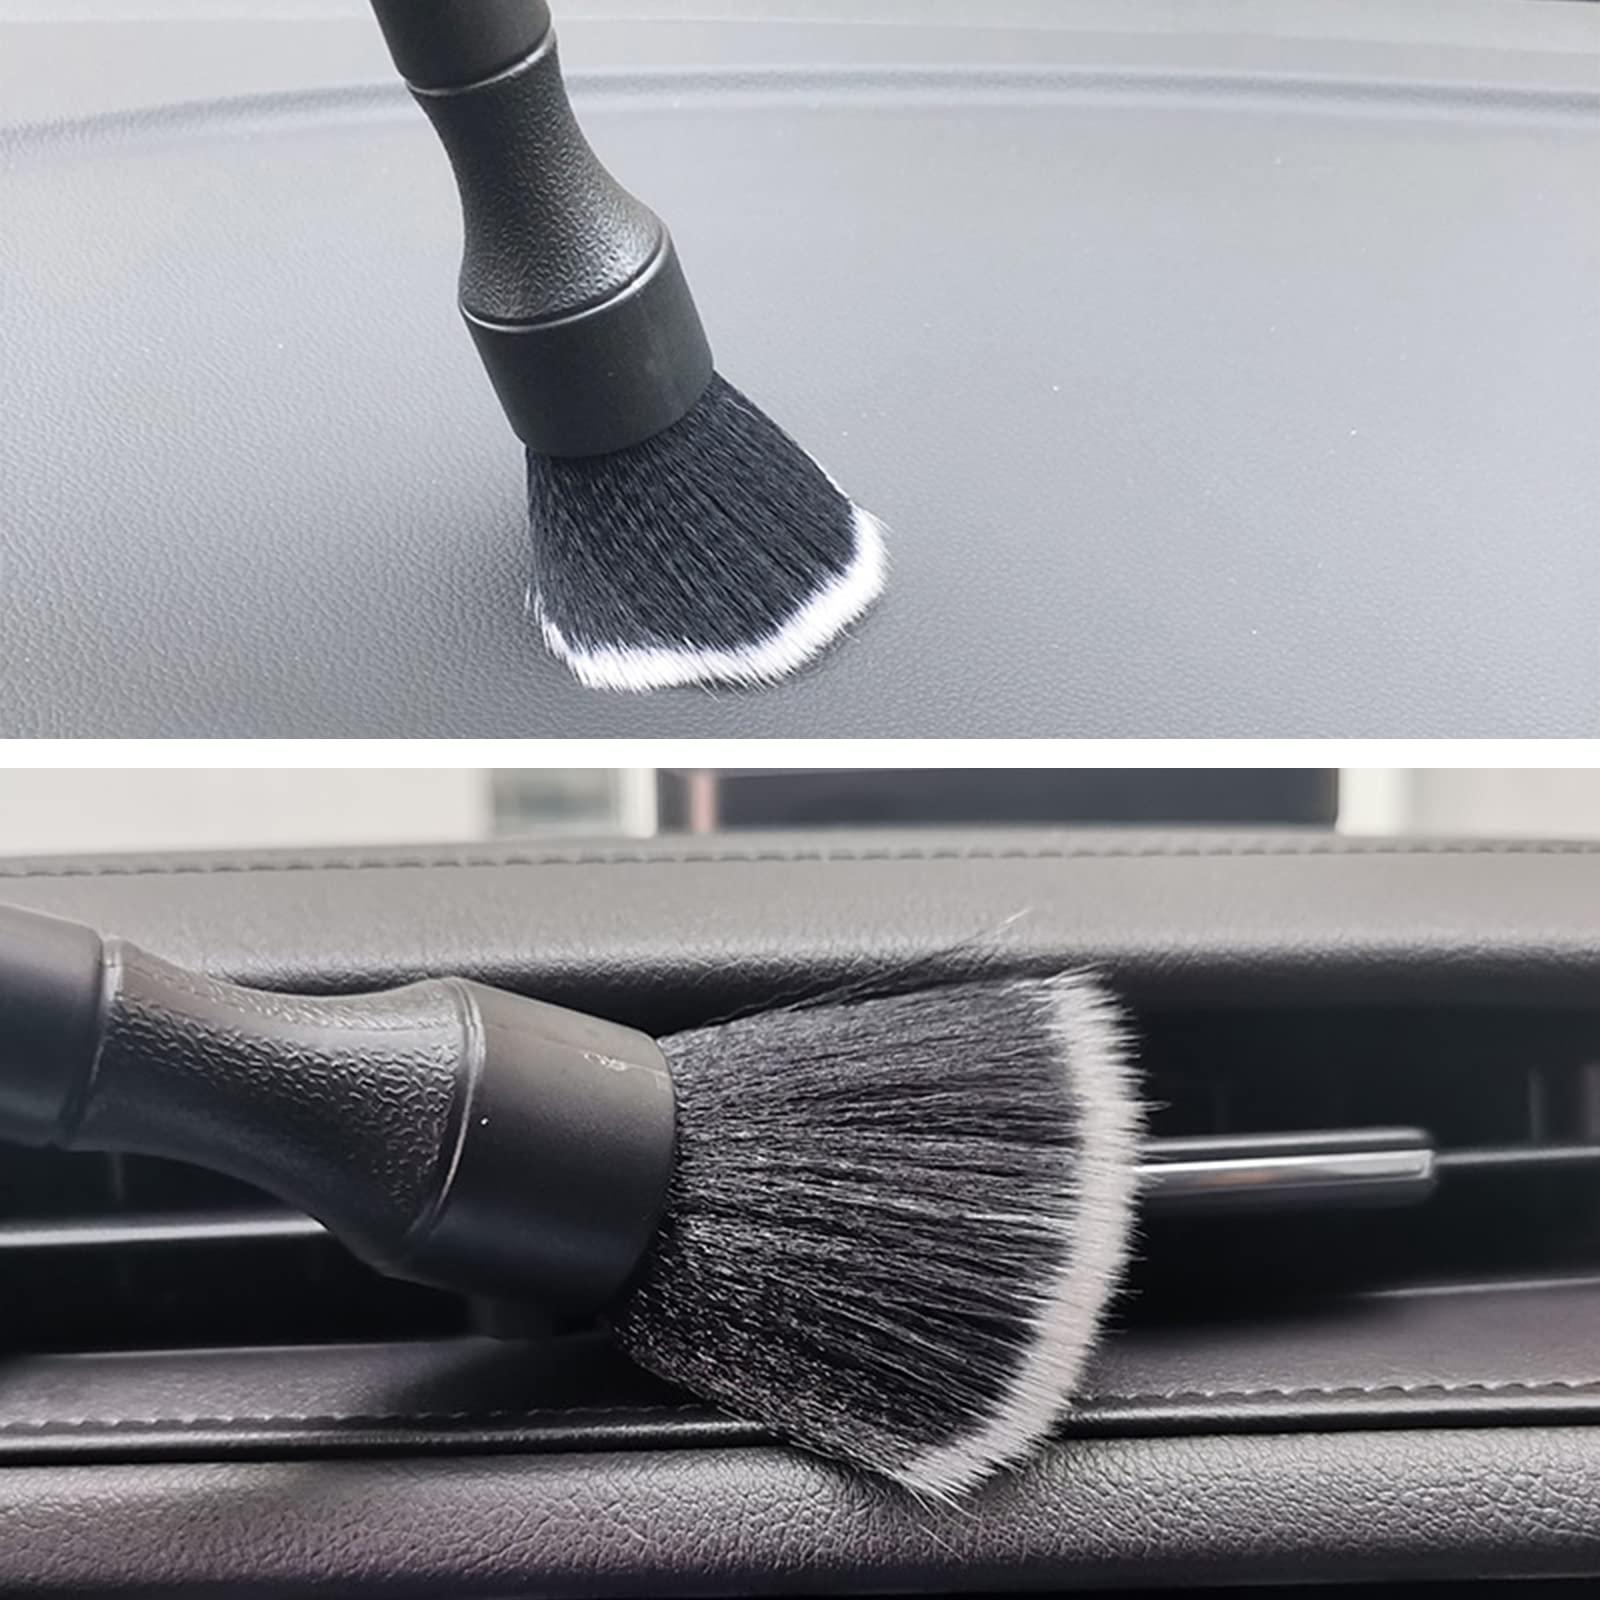 ALI2 Detailing Brush Set,Soft Comfortable Grip for Car Interior and Exterior Detailing Cleaning,Black 2